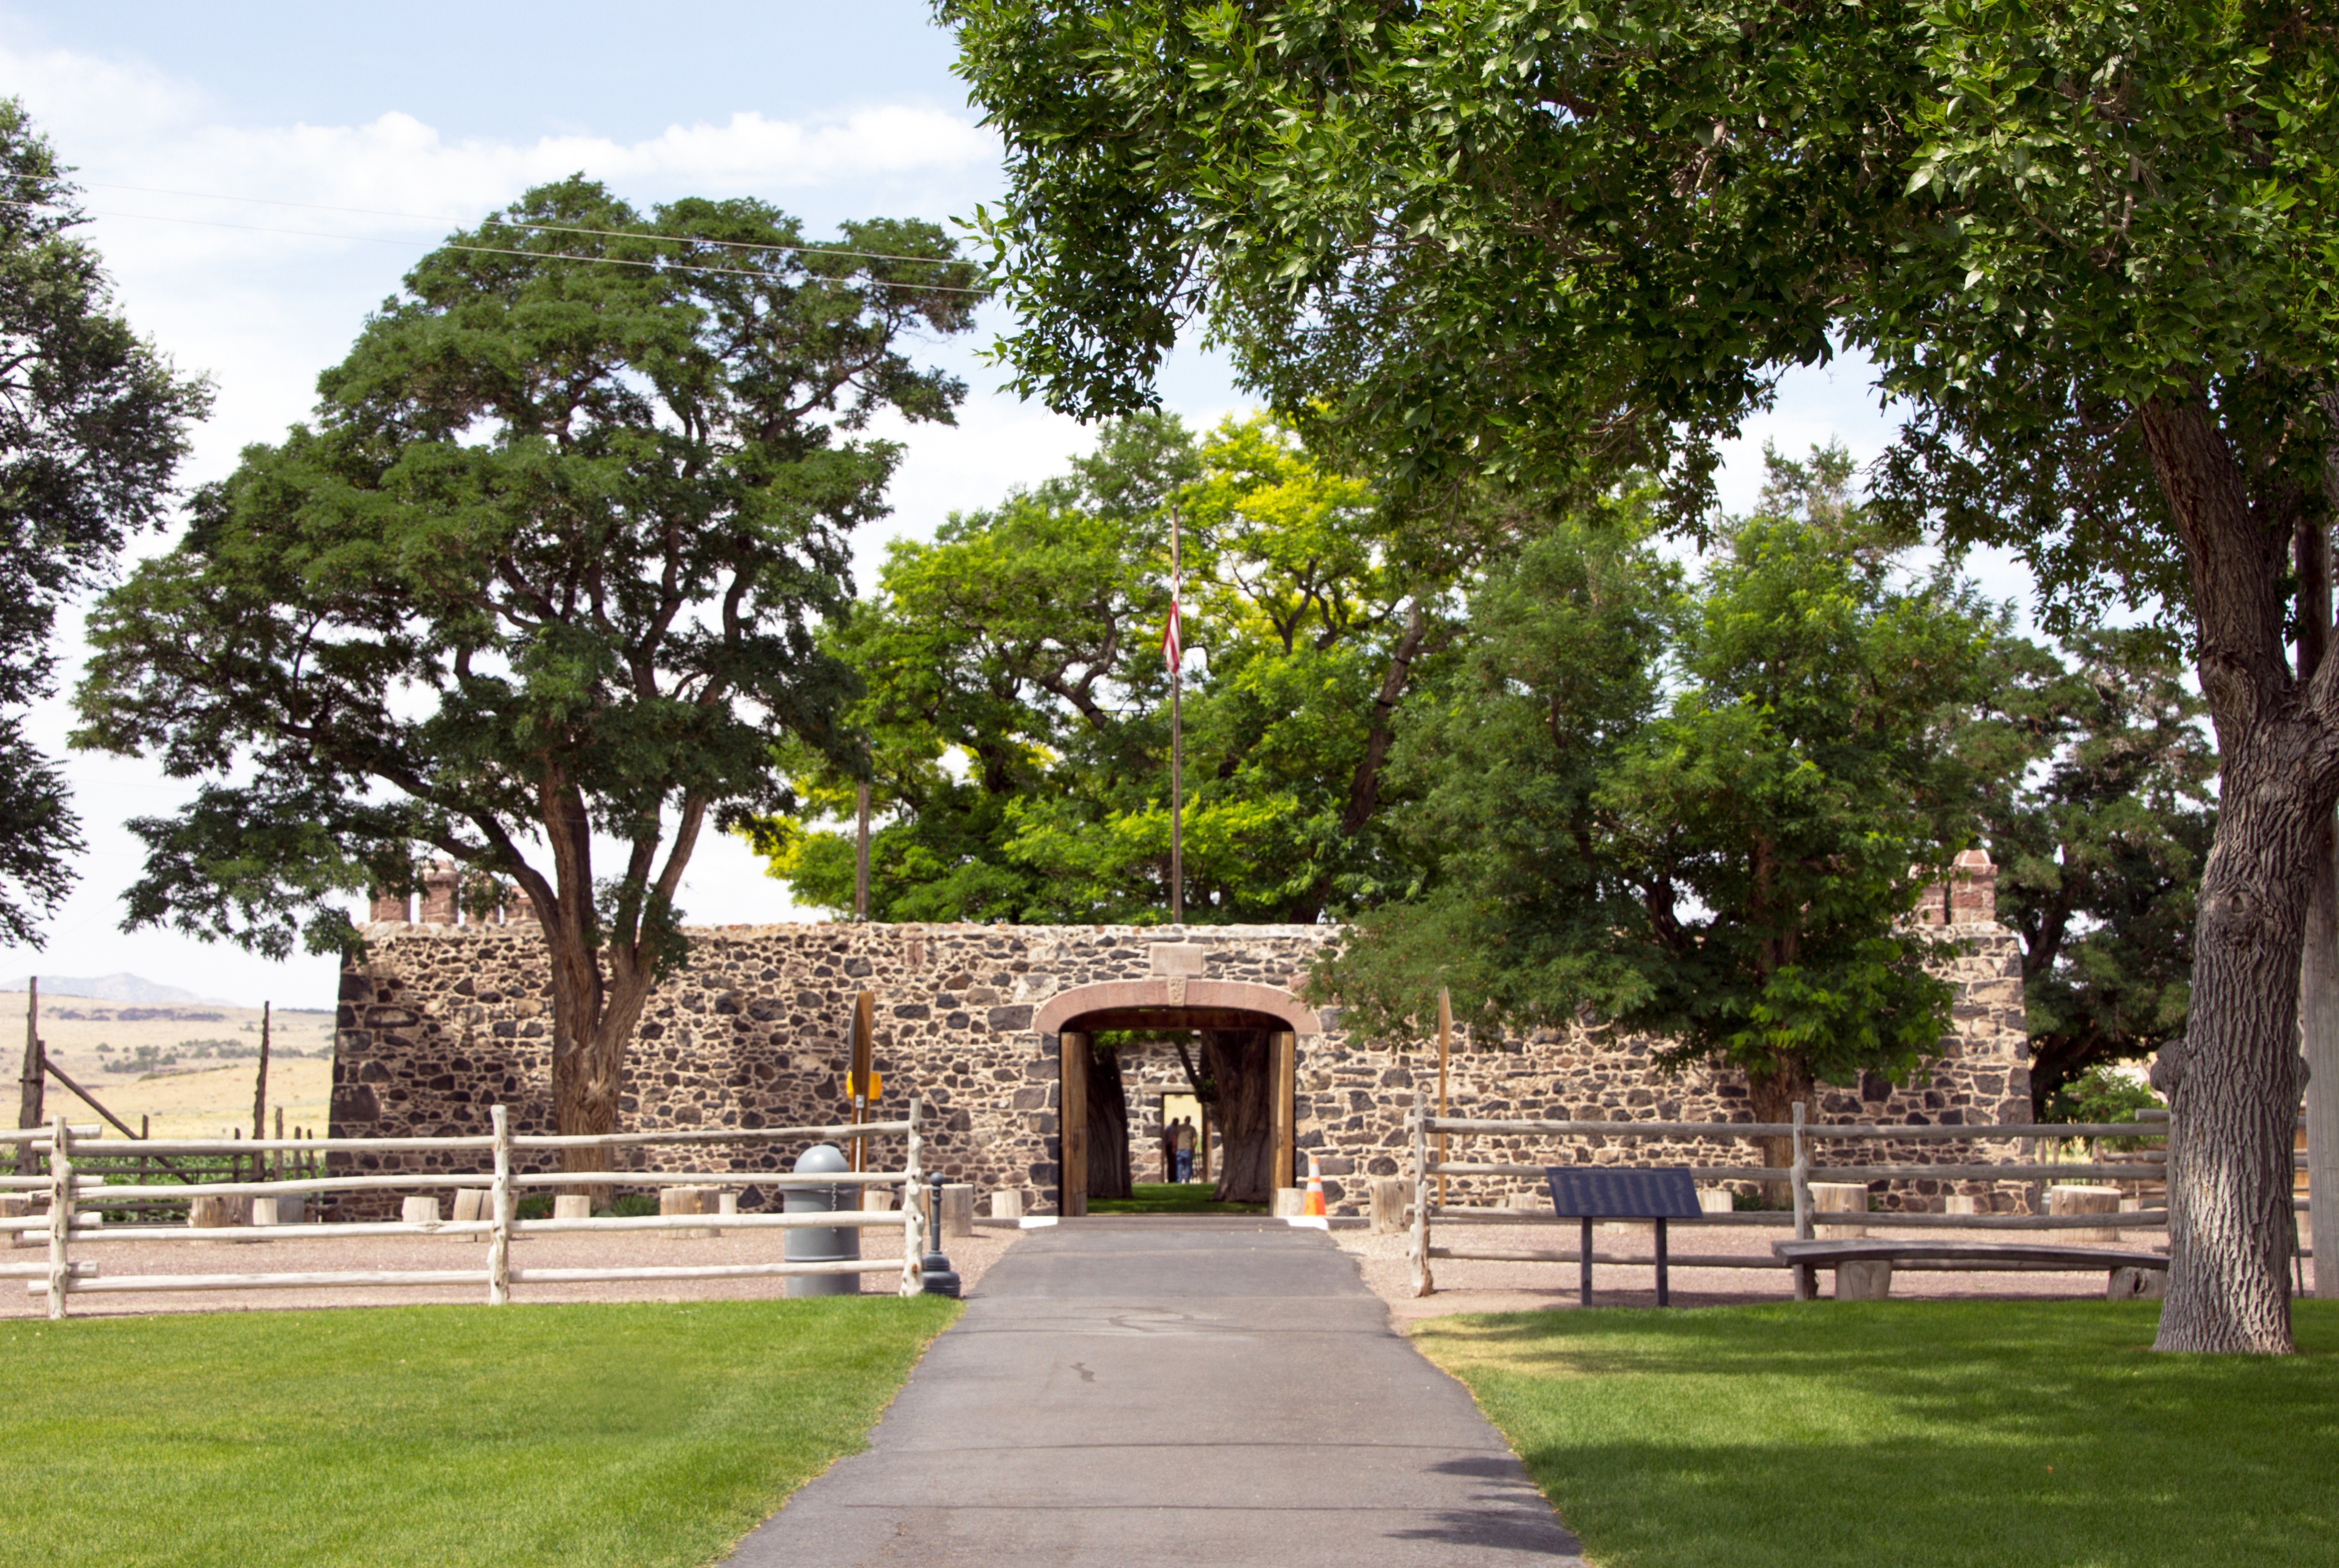 A stone wall with a large gate serving as the entrance to Cove Fort in Utah.